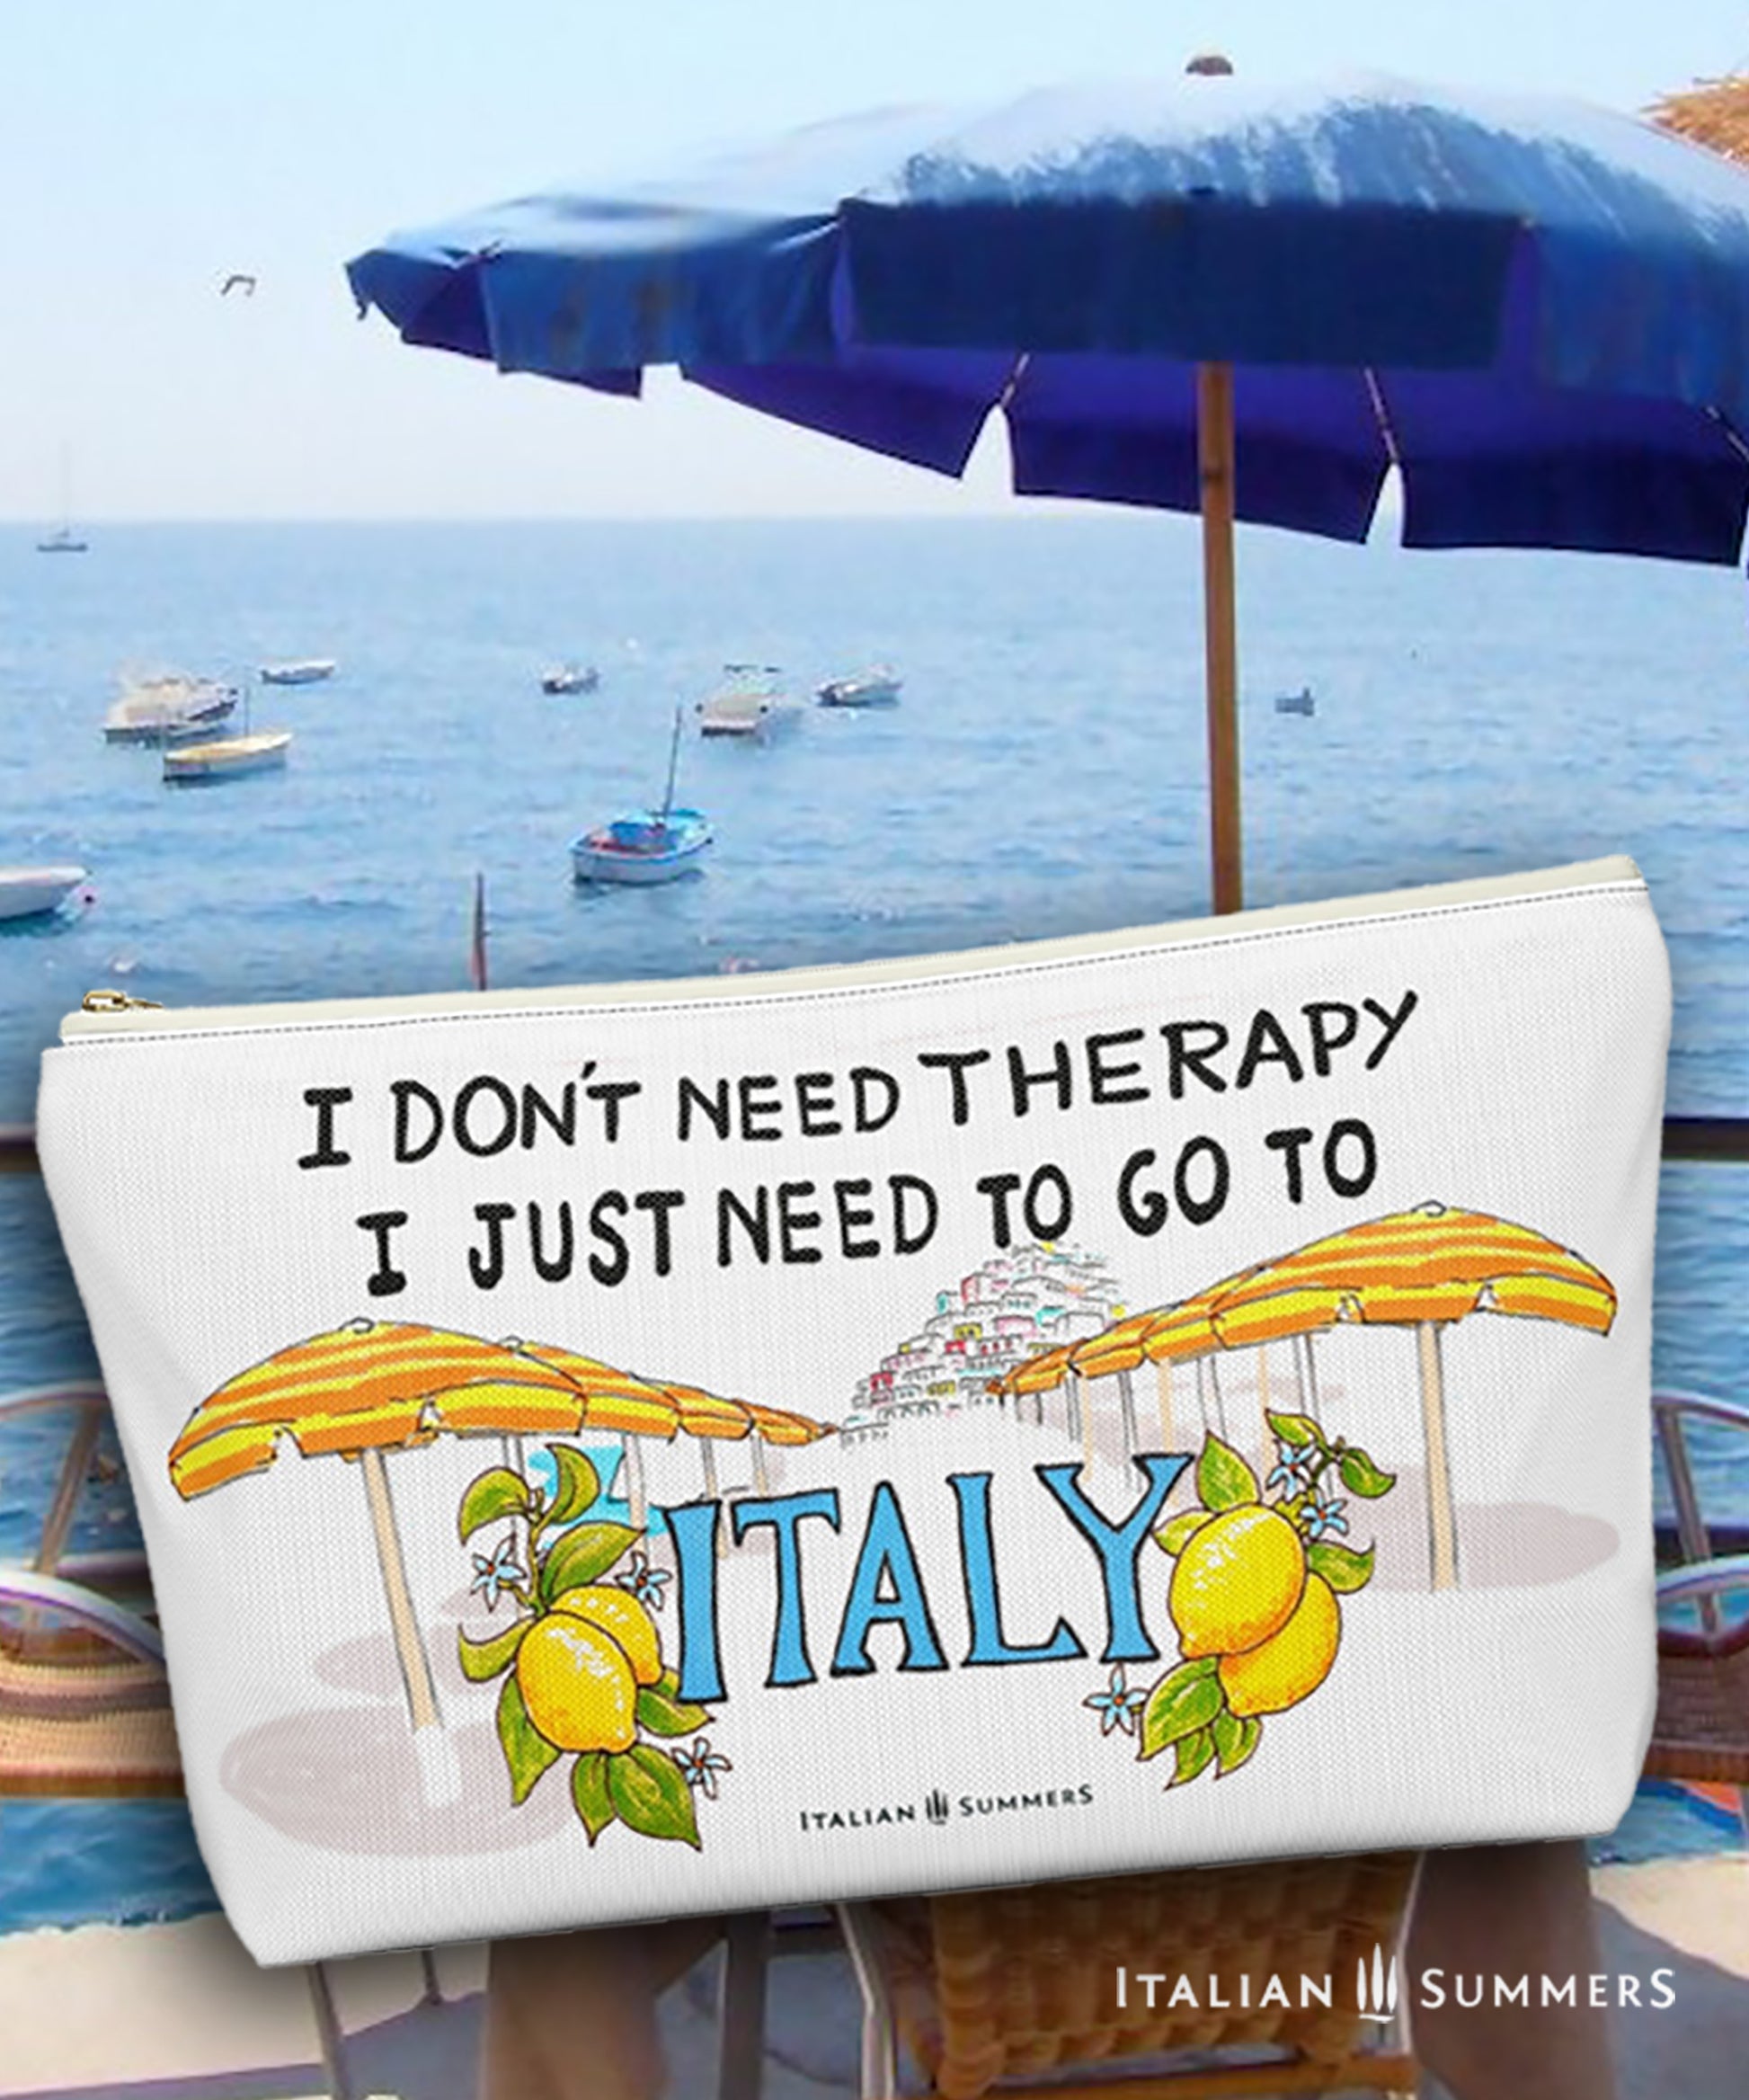 Italy inspired clutch of white canvas with he quote I don't need therapy, I just need to go to Italy. On the clutch there is a sketch of the beach umbrellas on Positano beach The beach umbrellas are yellow and orange striped. In the distance you ccan see the stagered houses of Positano. The word Italy in in big blue letters and is flancked with lemons. Designed by Italian Summers.